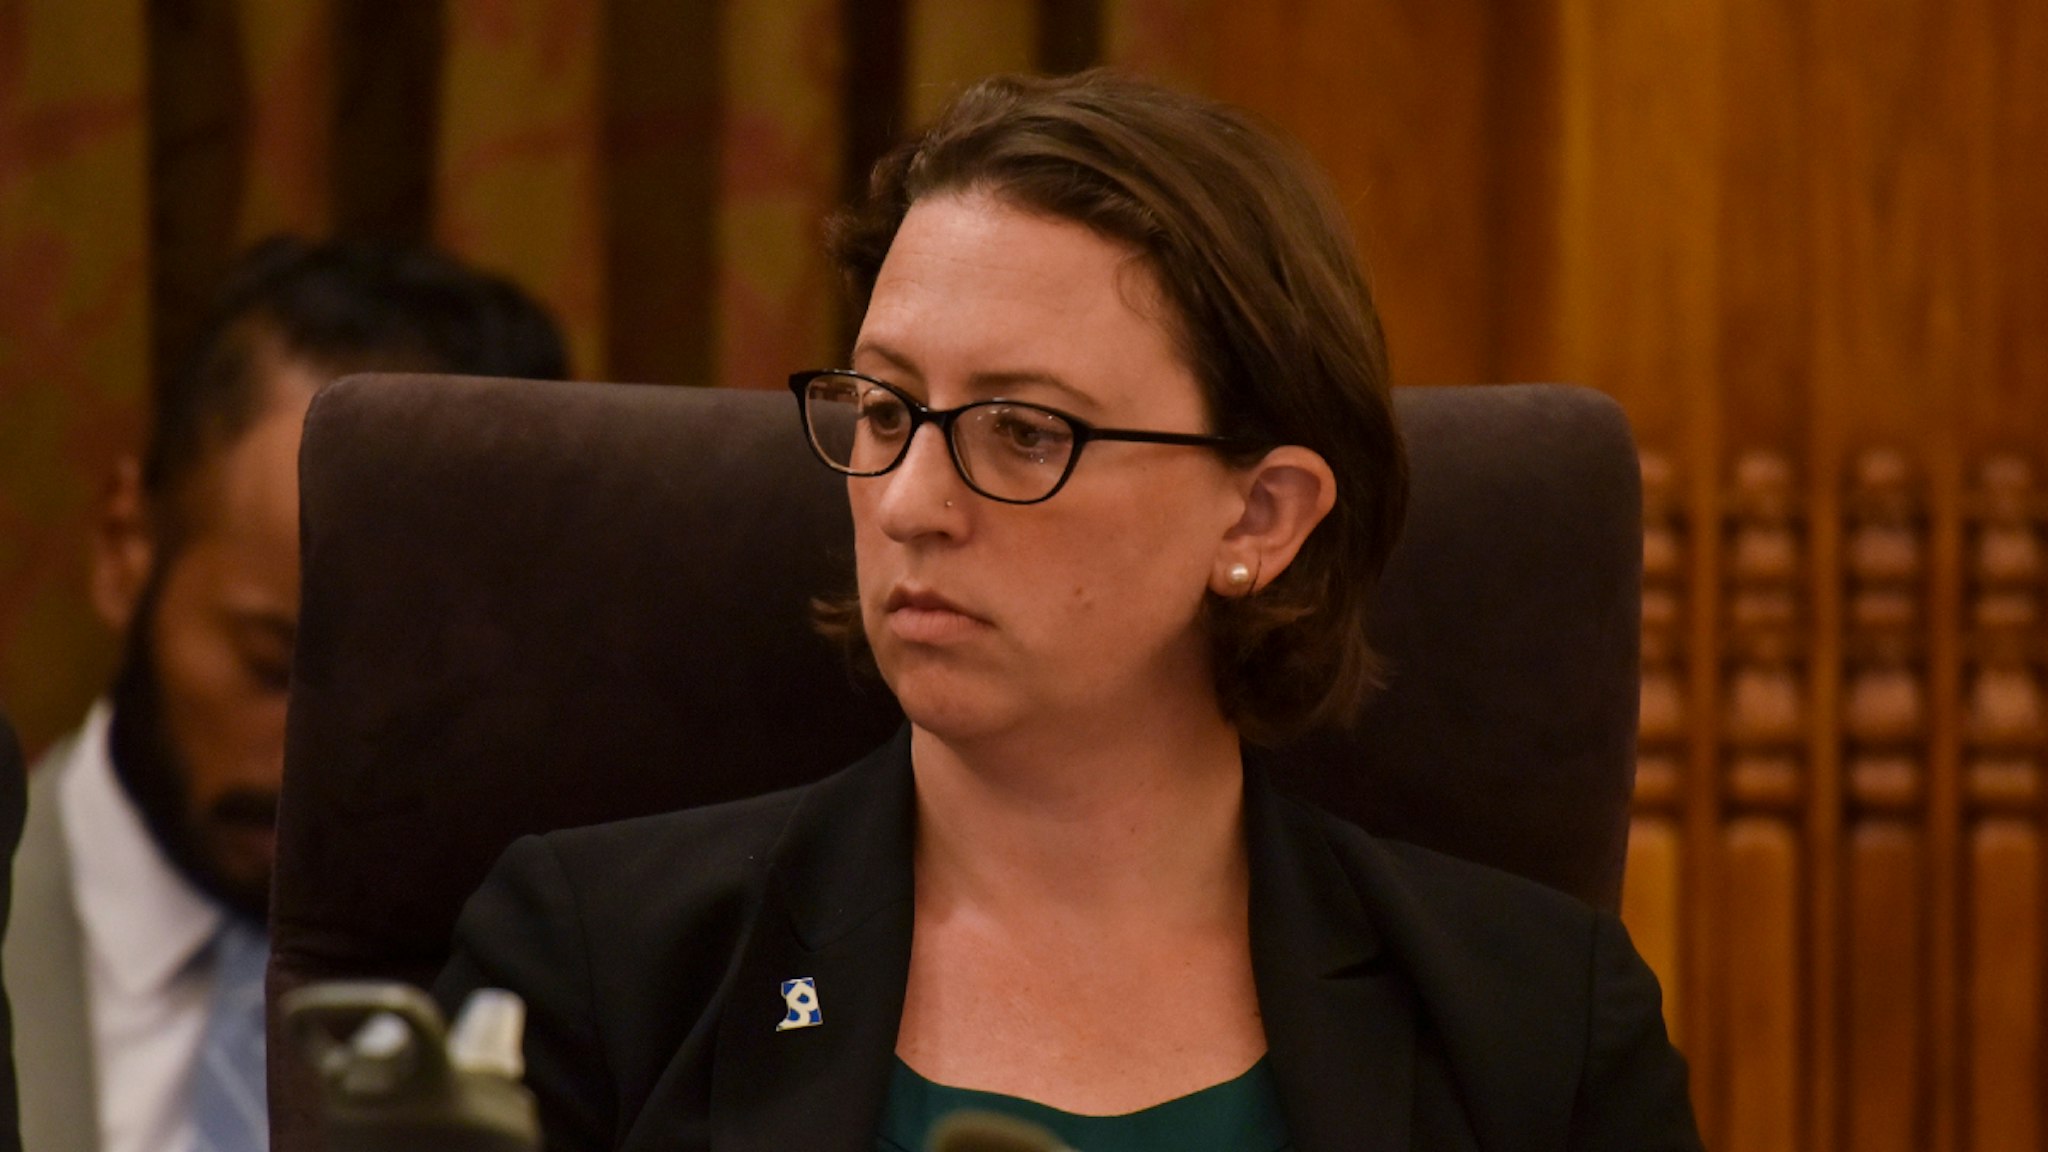 WASHINGTON, DC - JUNE 18: Ward 1 Councilmember Brianne K. Nadeau attends one of the final D.C. Council meetings before summer break at the Wilson Building on Tuesday, June 18, 2019, in Washington, DC.